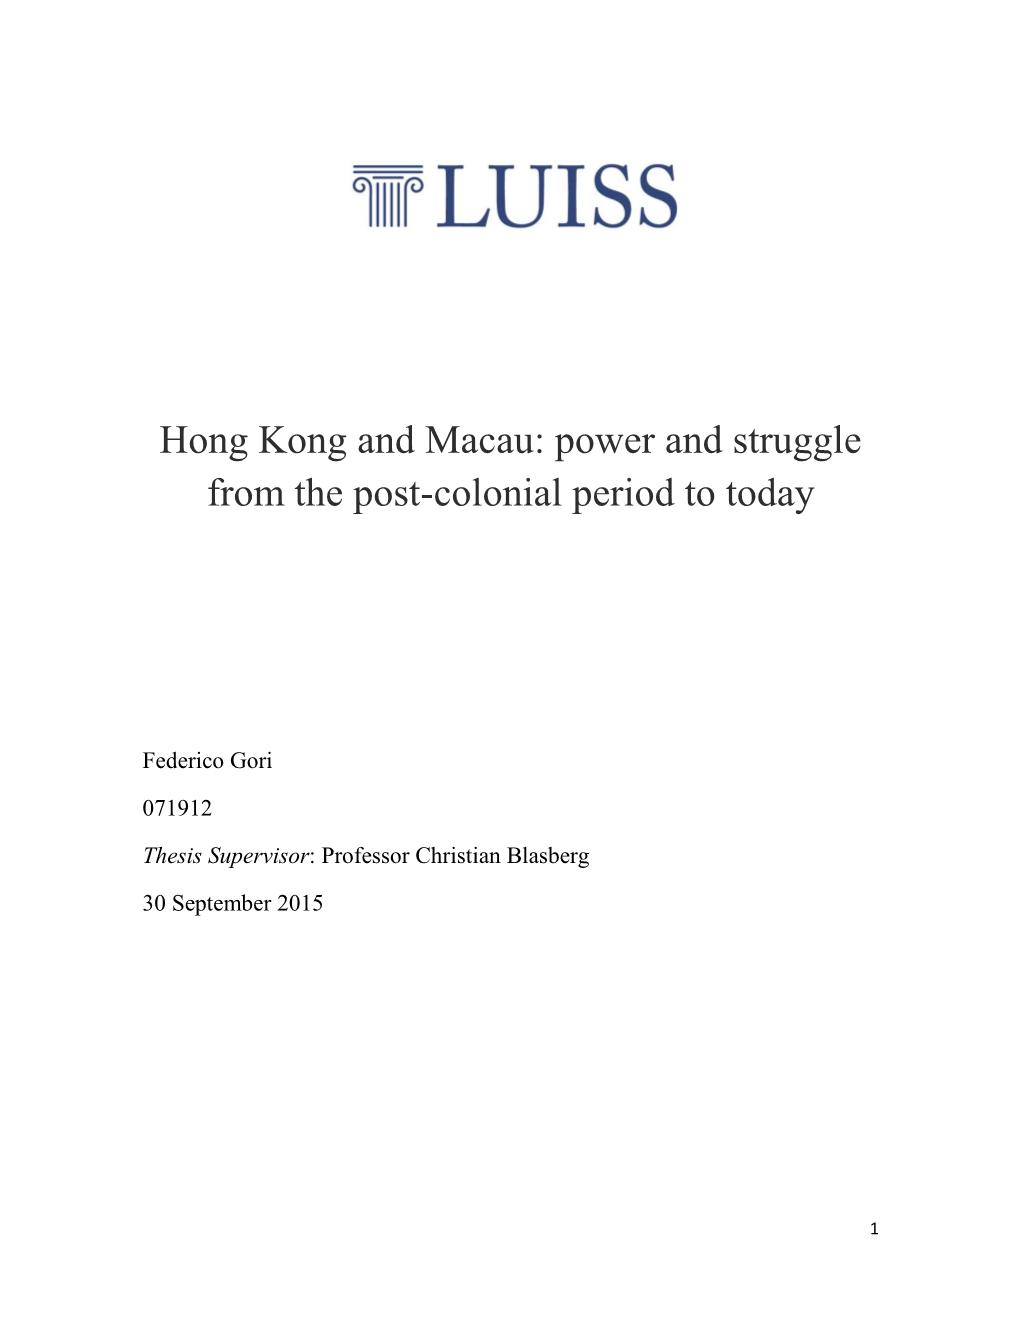 Hong Kong and Macau: Power and Struggle from the Post-Colonial Period to Today